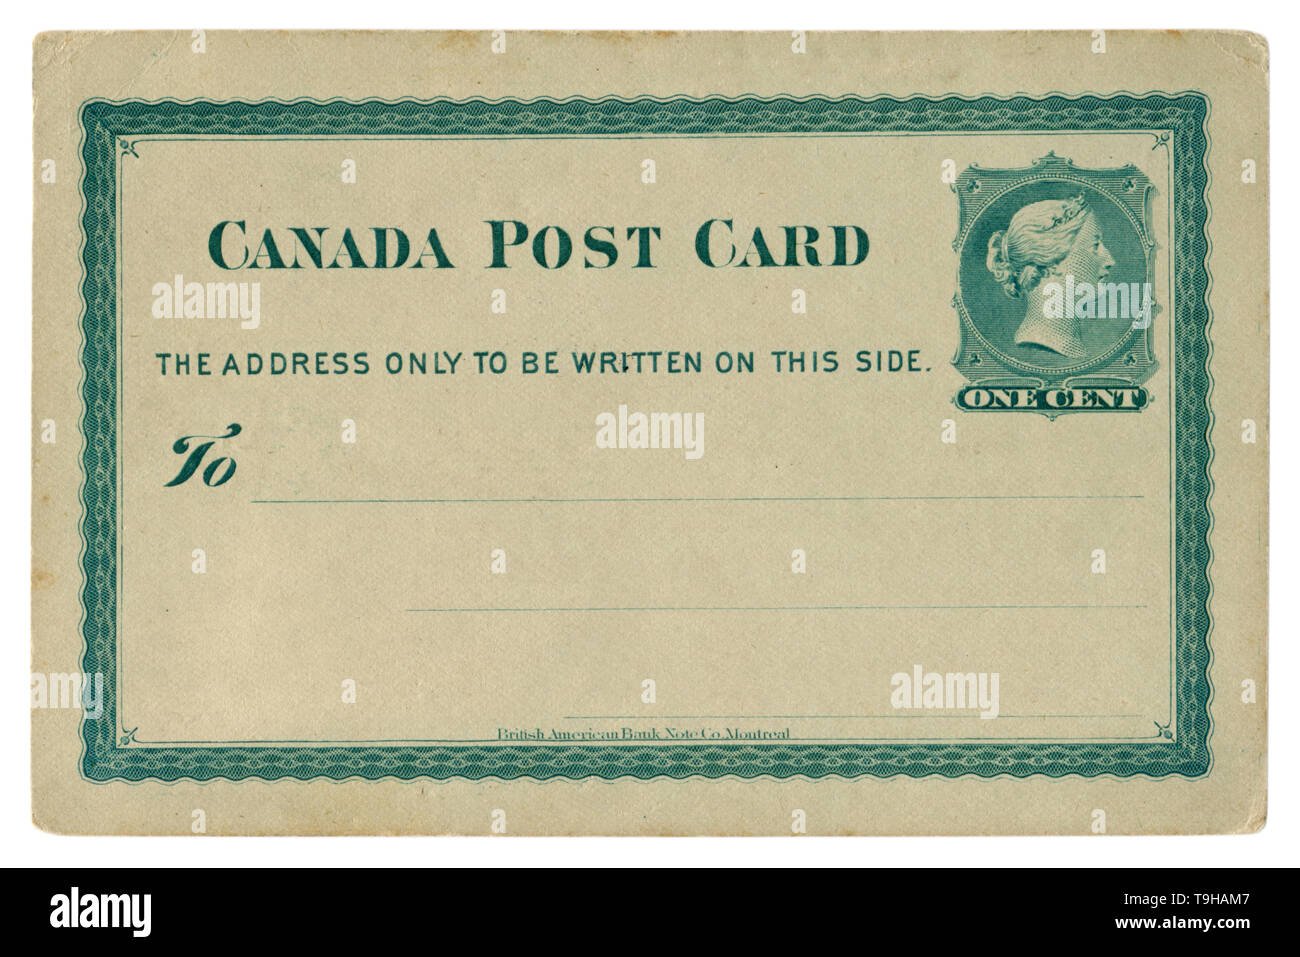 Hamilton, Ontario, Canada  - 25 February 1878: Blanked Canadian historical Post Card with green patterned frame, Imprinted One Cent Queen Victoria Stock Photo